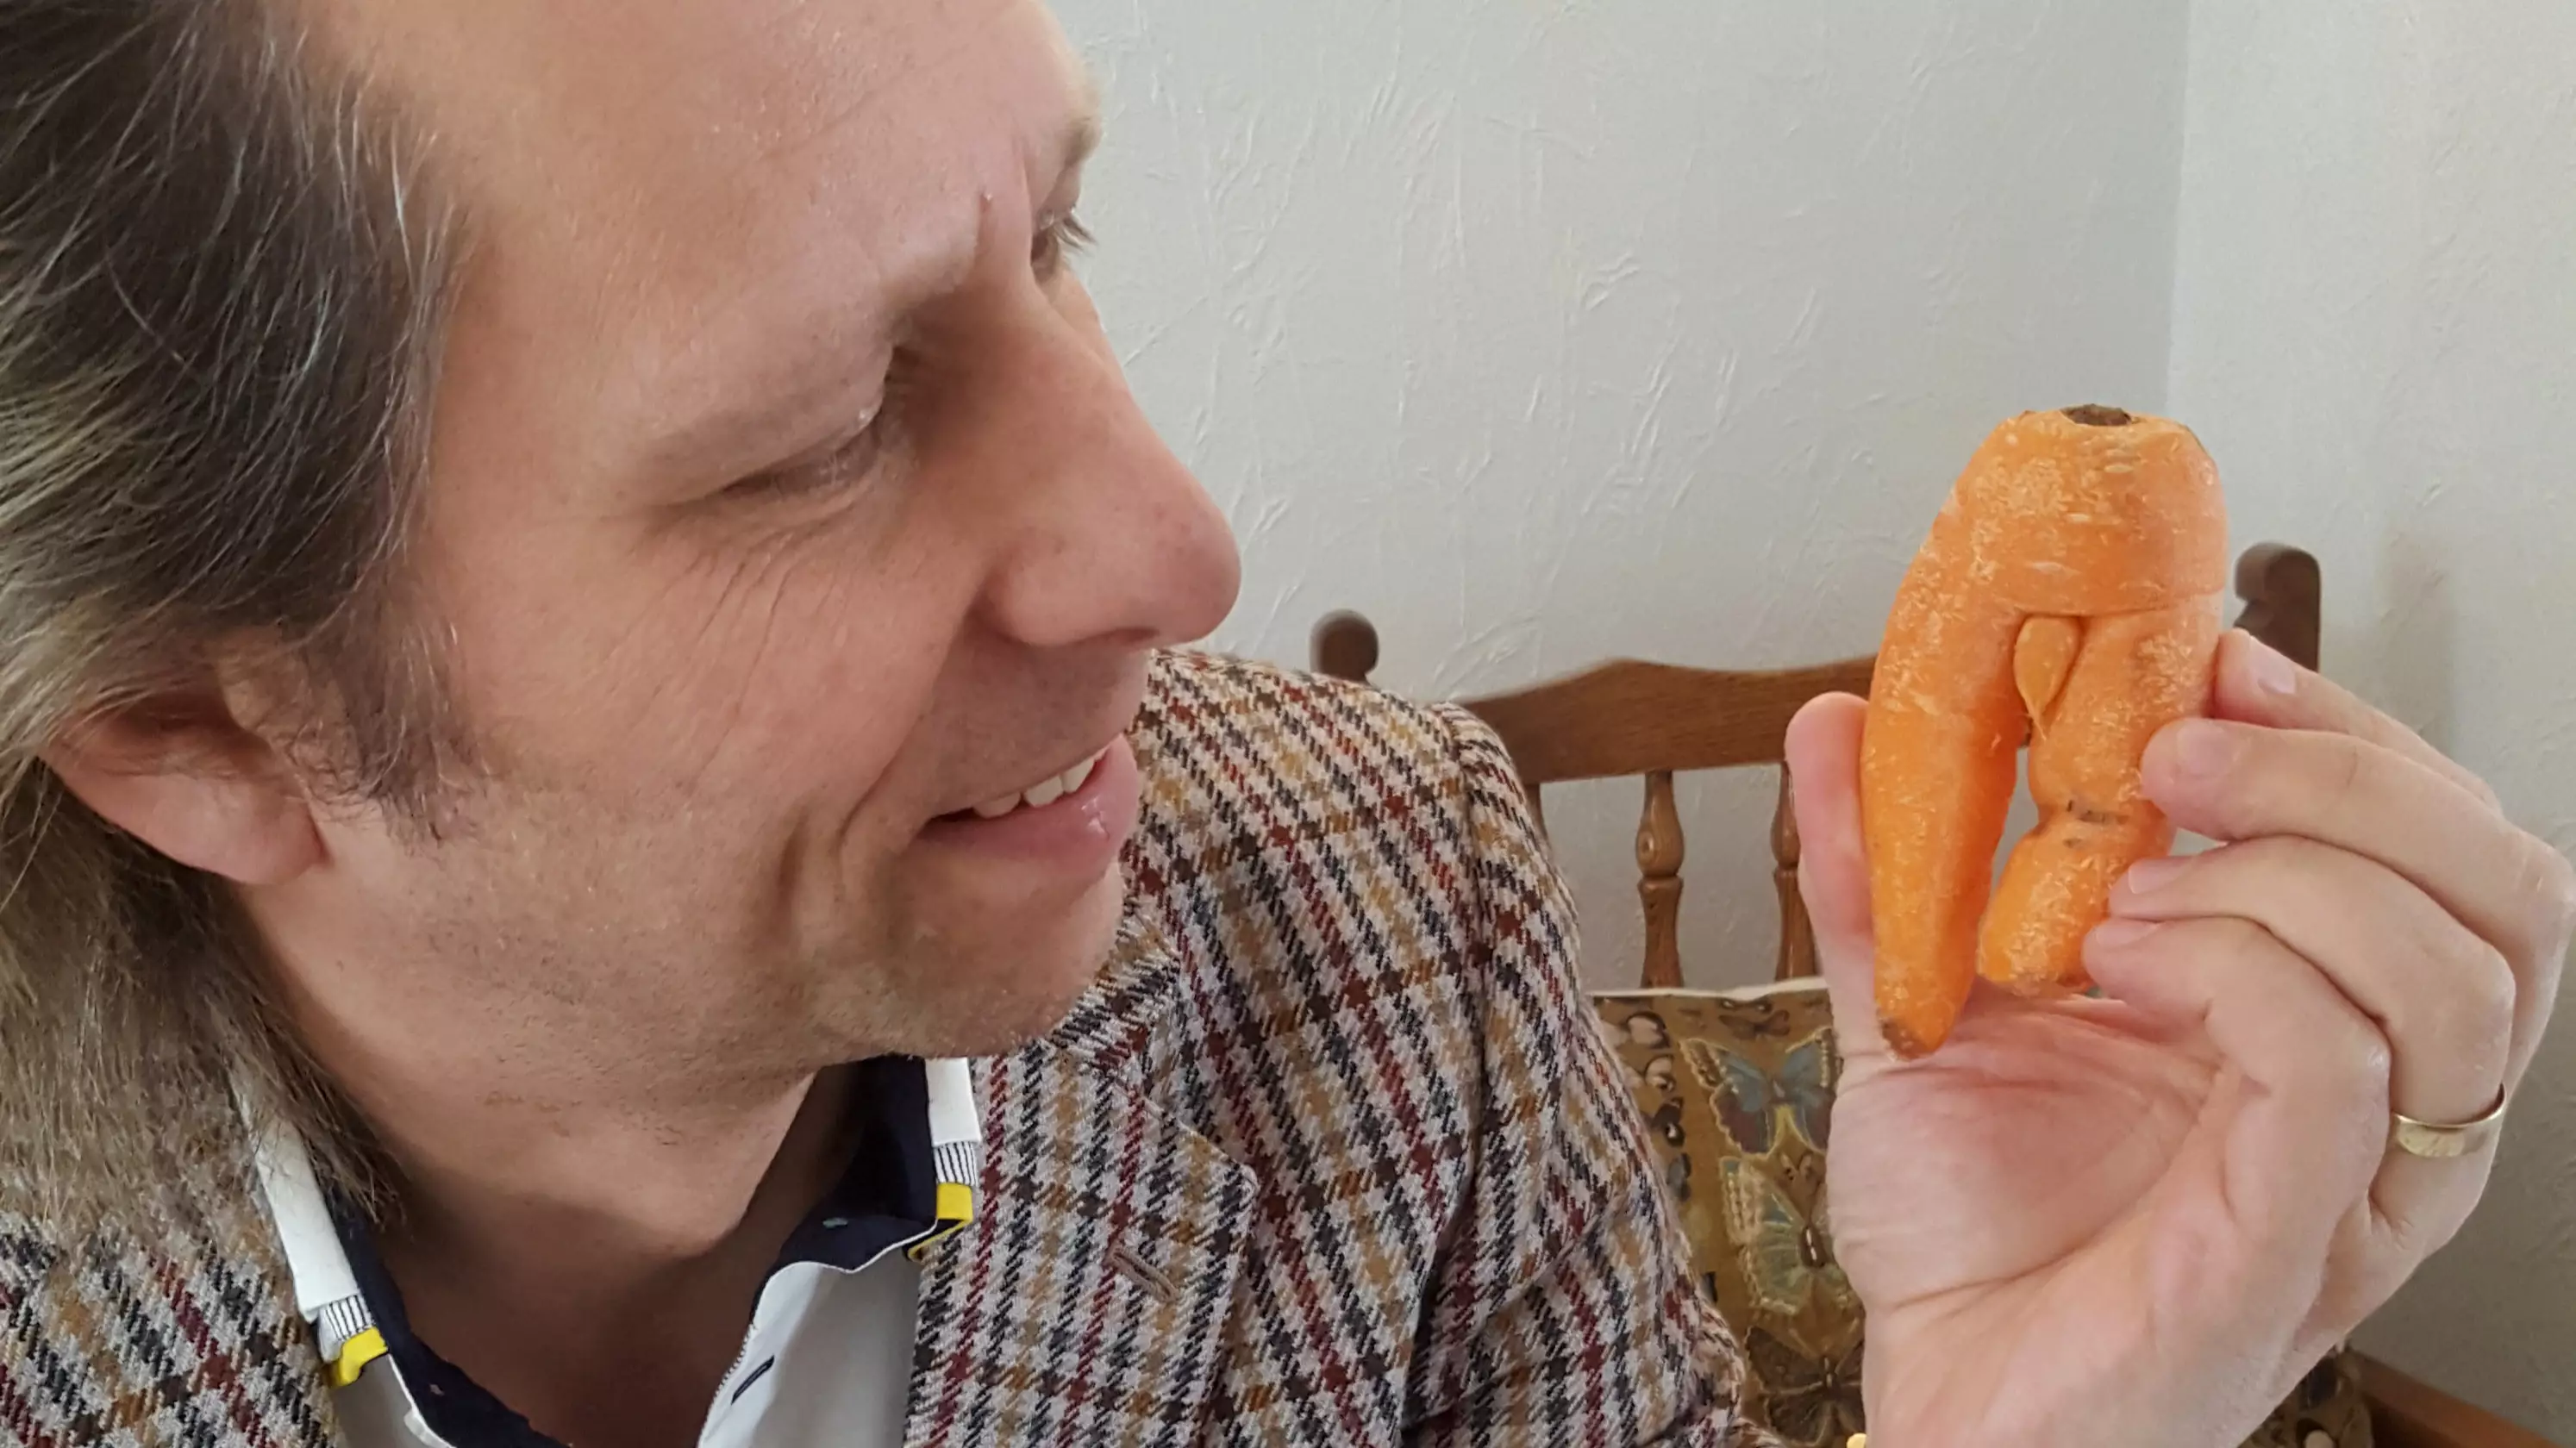 Man Refuses To Eat Rude Looking Carrot Because He Wants it As A Souvenir